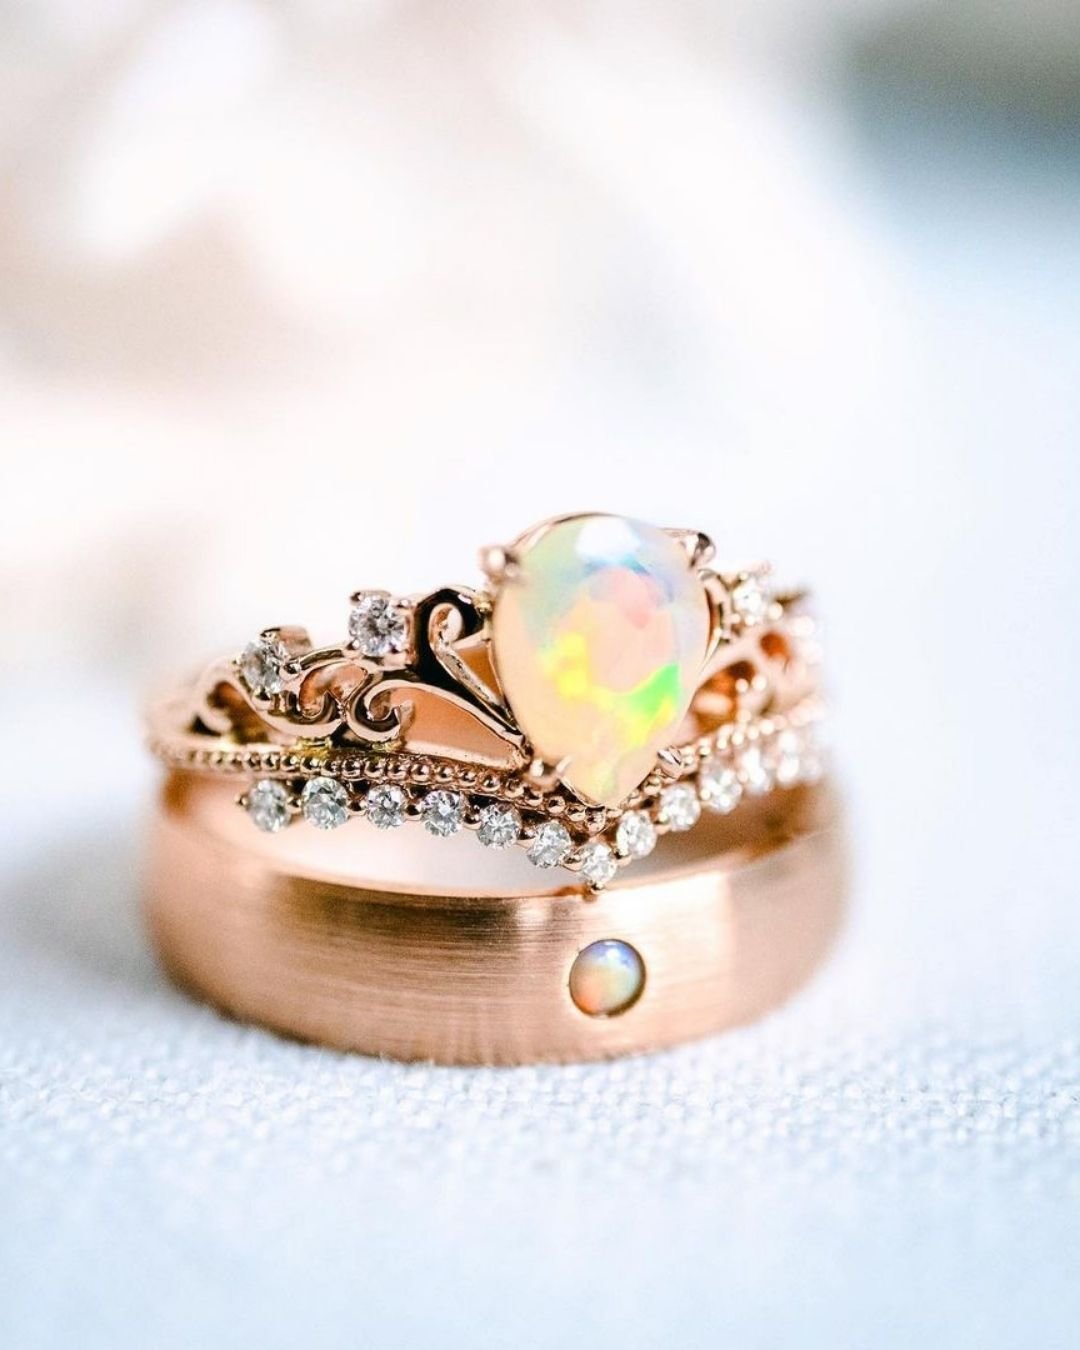 rose gold wedding rings with opal gems